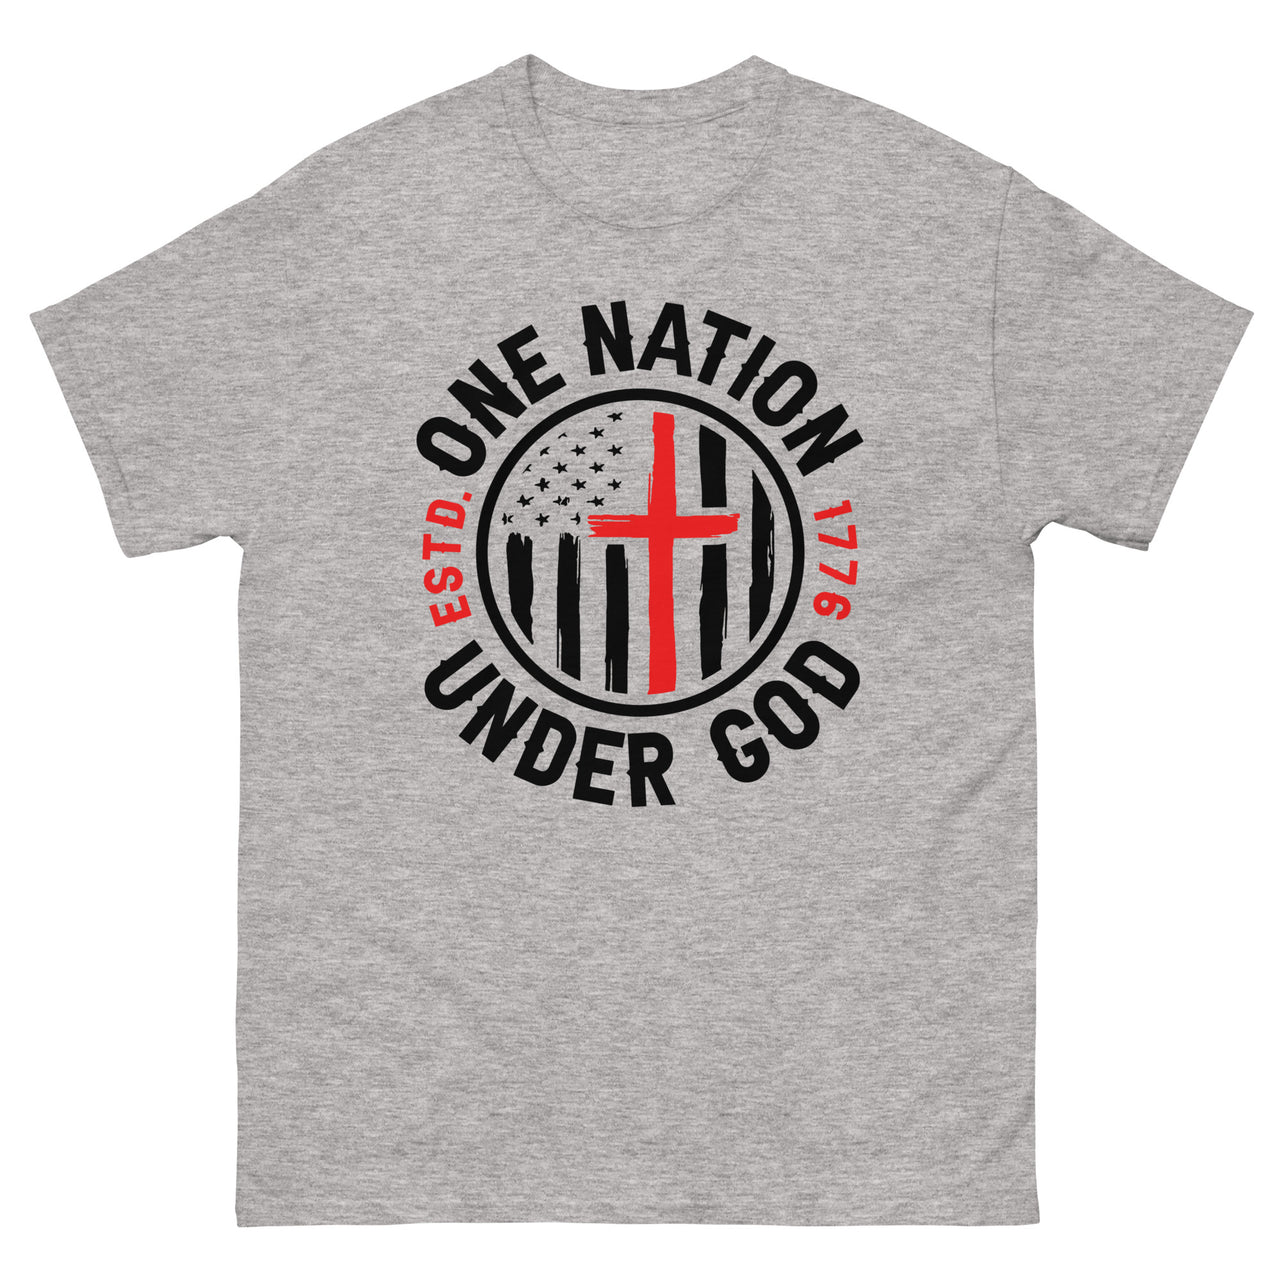 One Nation Under God ver2 Men's classic tee